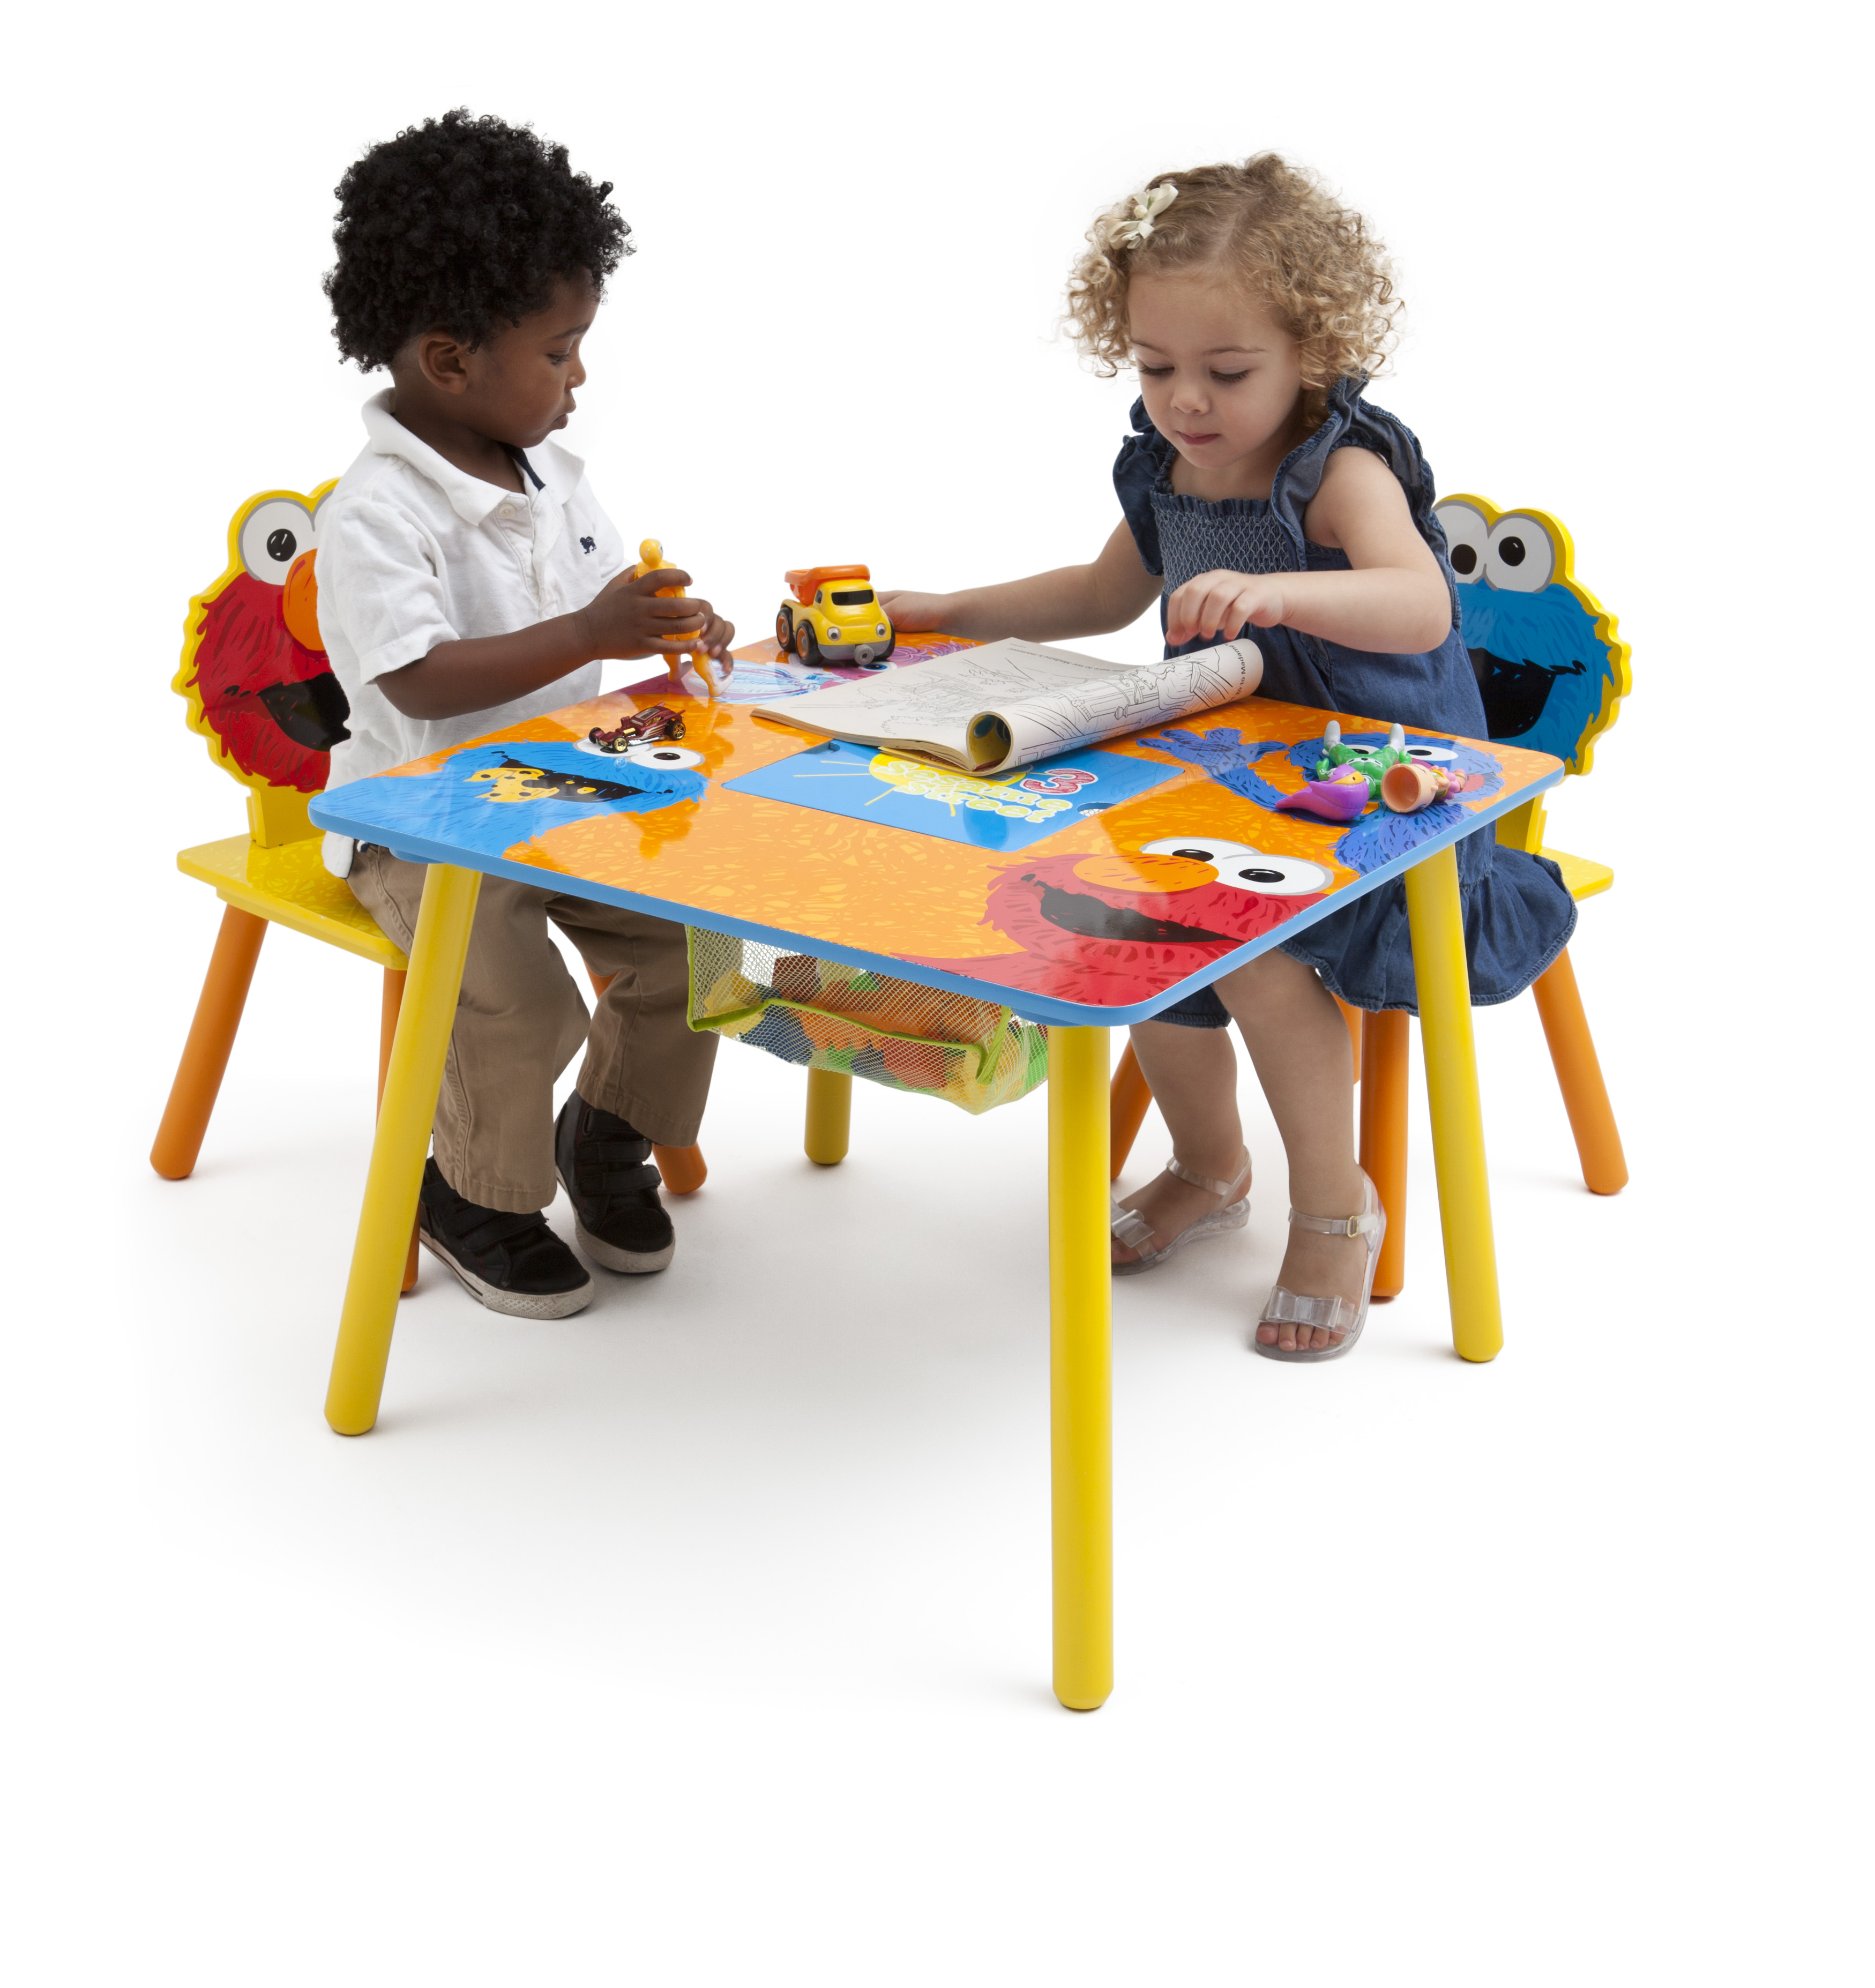 Sesame Street Wood Kids Storage Table and Chairs Set by Delta Children, Greenguard Gold Certified - image 4 of 8